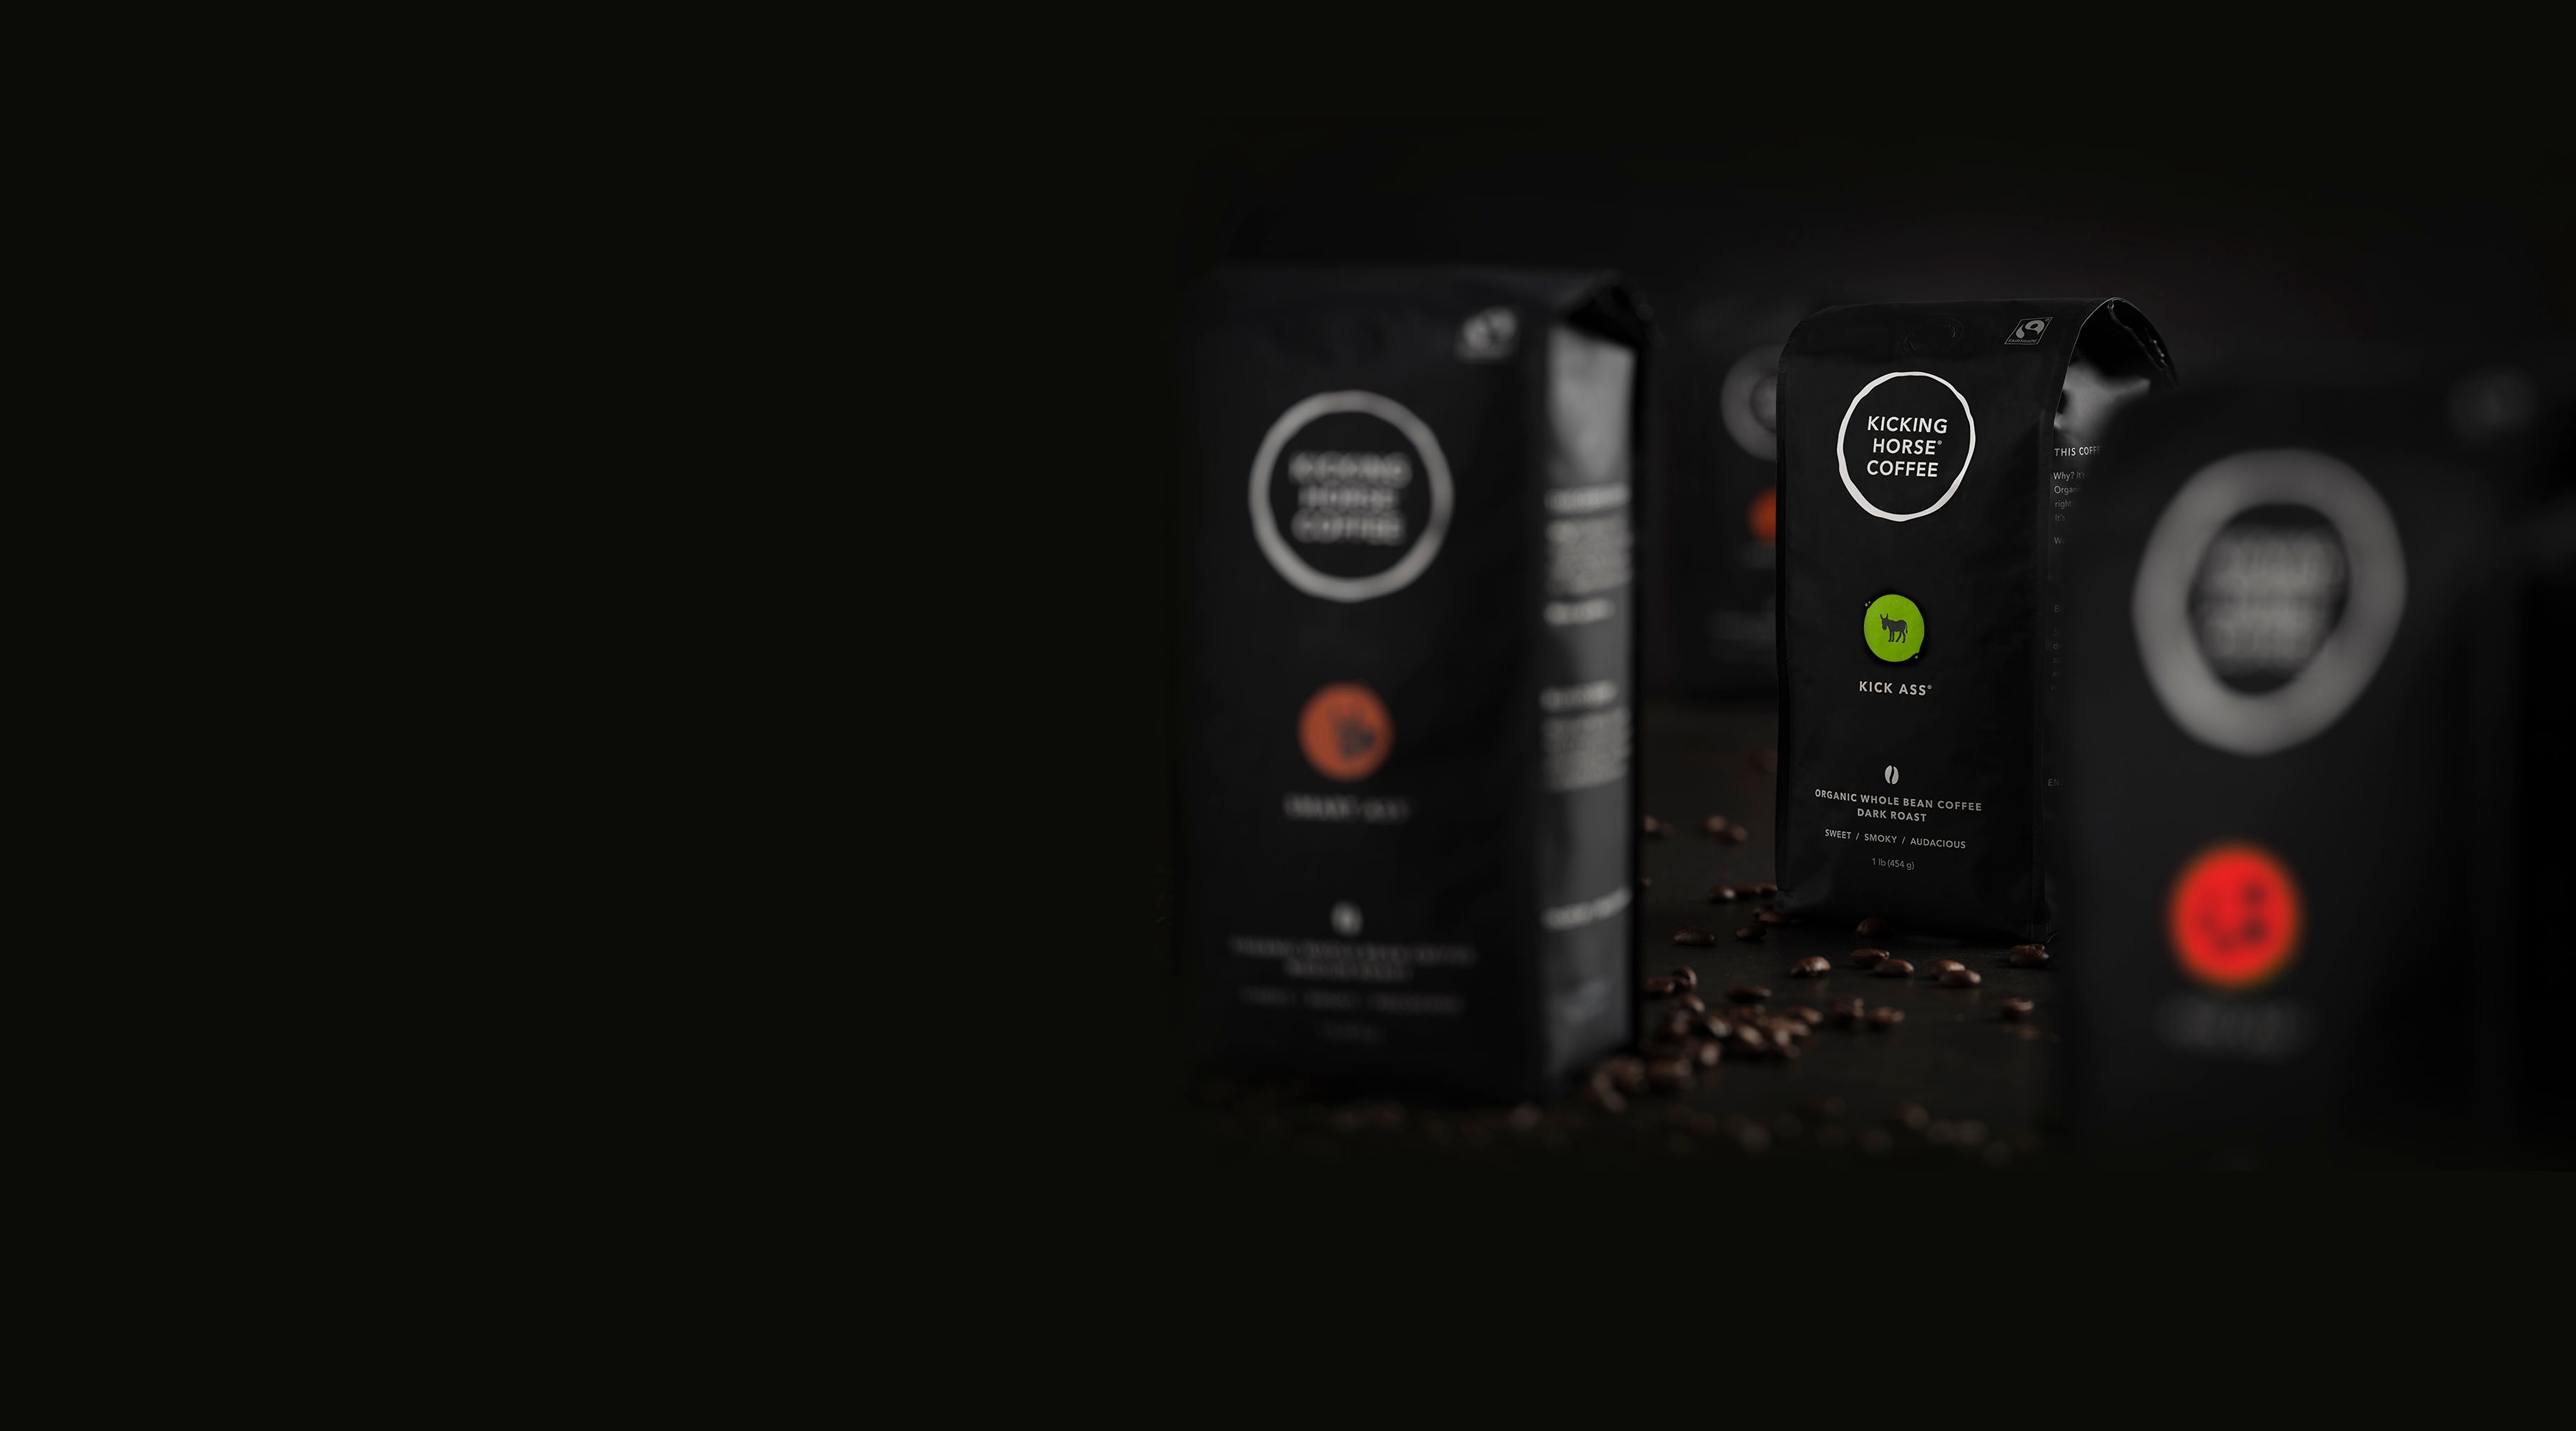 Kicking Horse Coffee Subscription